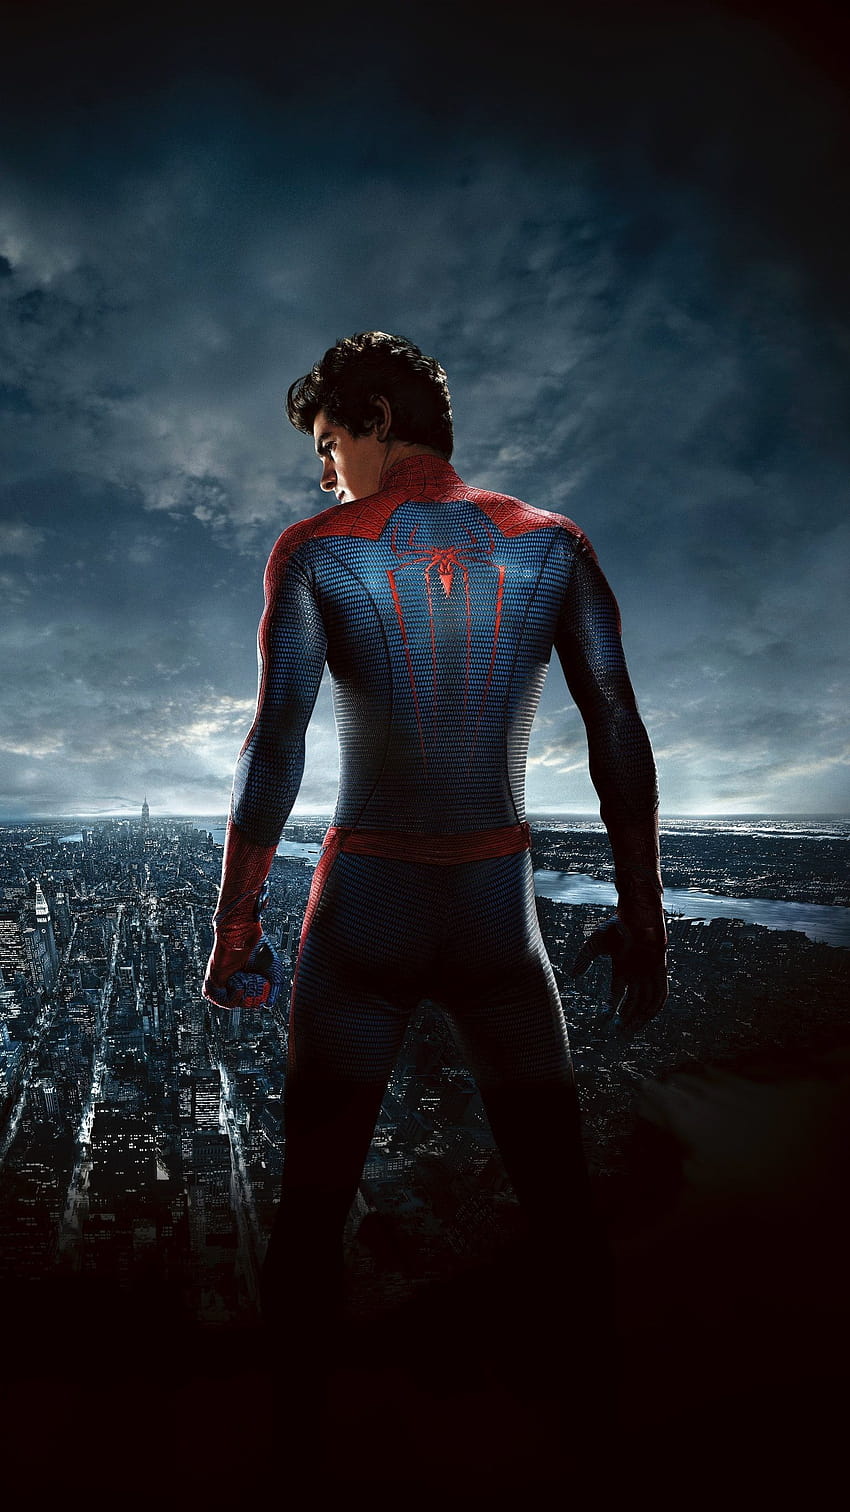 Free download The Amazing Spiderman Hd Wallpaper Best Wallpapers 1280x800  for your Desktop Mobile  Tablet  Explore 50 Amazing Spider Man HD  Wallpapers  Spider Man Wallpapers Spider Man Hd Wallpaper